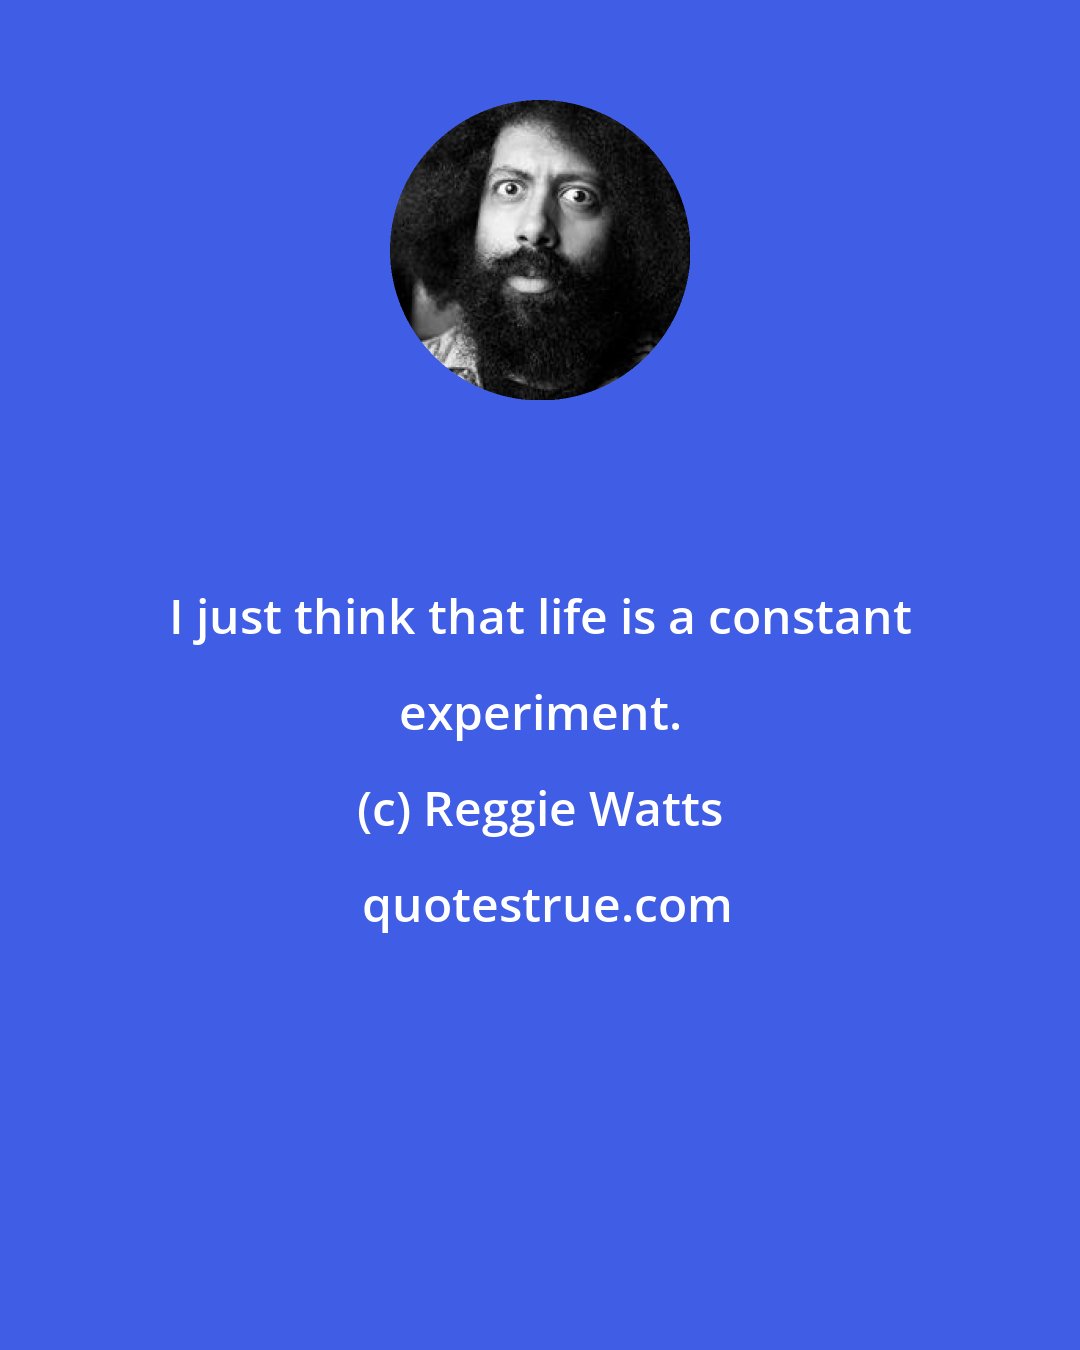 Reggie Watts: I just think that life is a constant experiment.